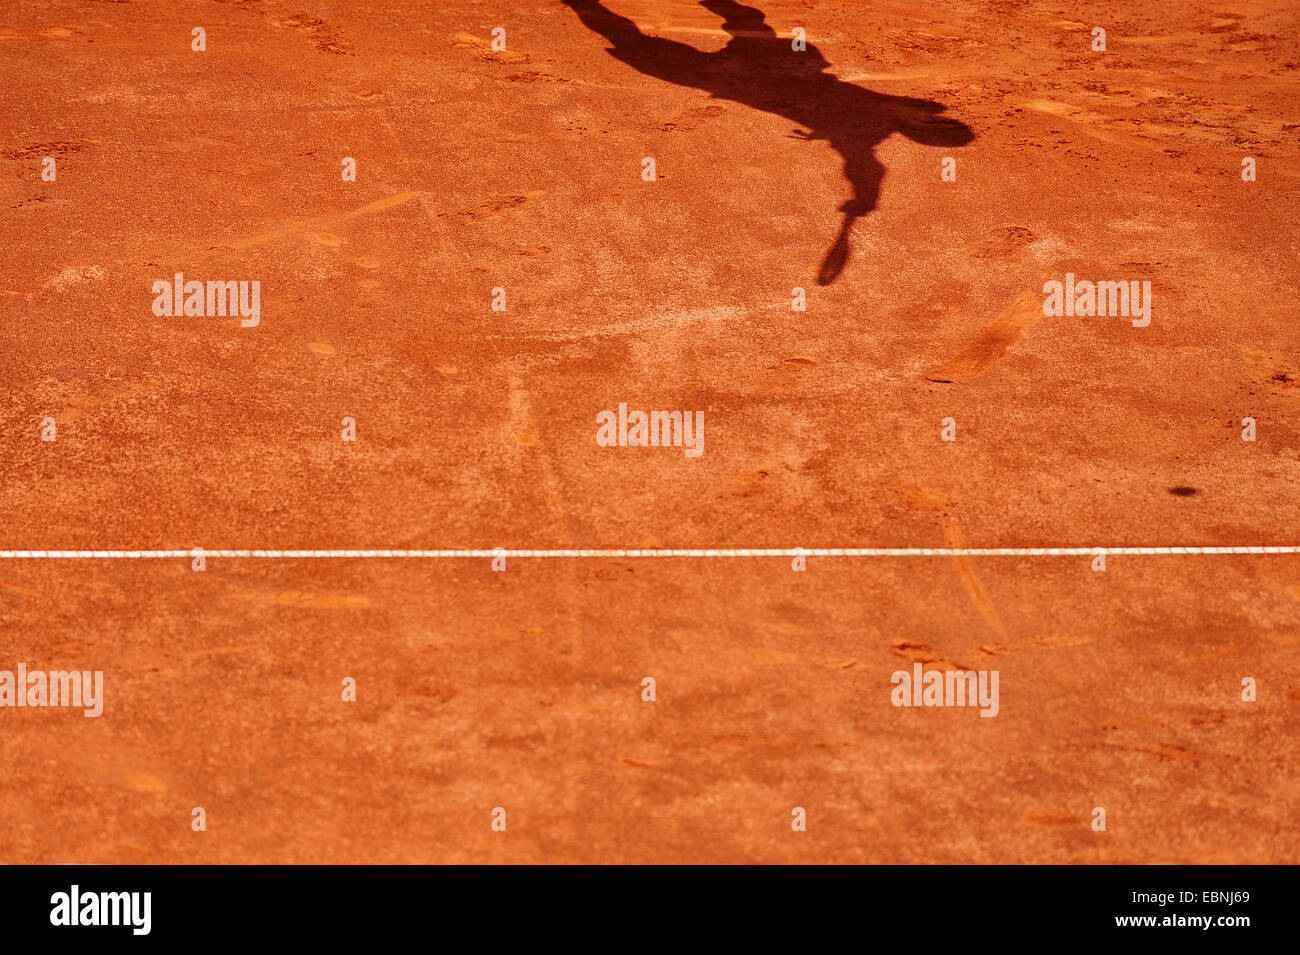 Shadow of a tennis player serving on a clay court Stock Photo